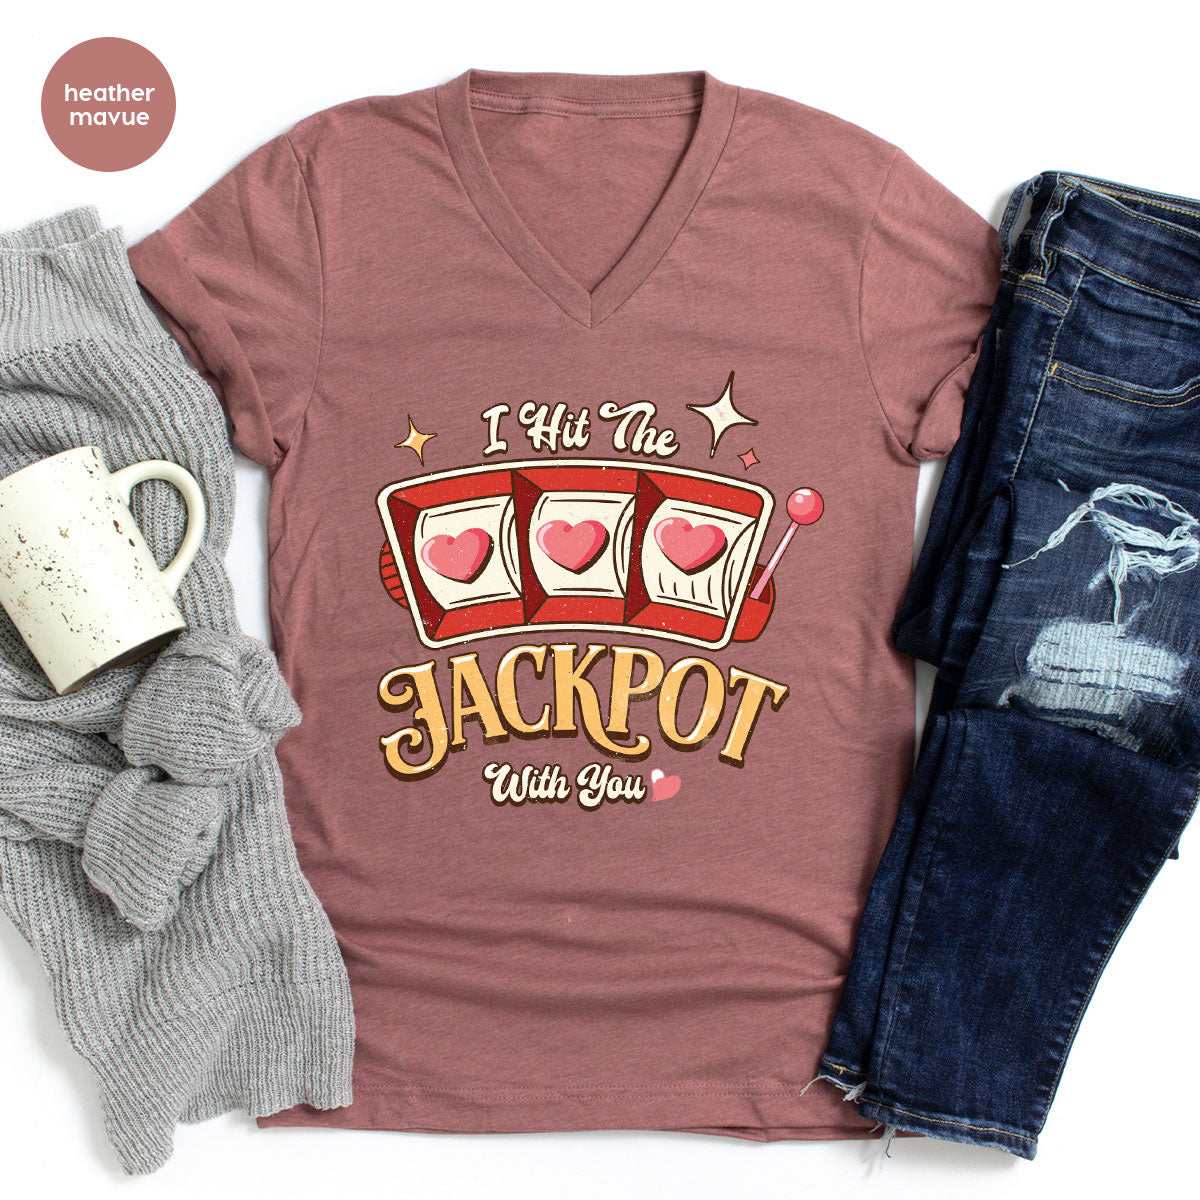 I Hit The Jackpot With You Shirt, Romantic Valentine's Day T-Shirt